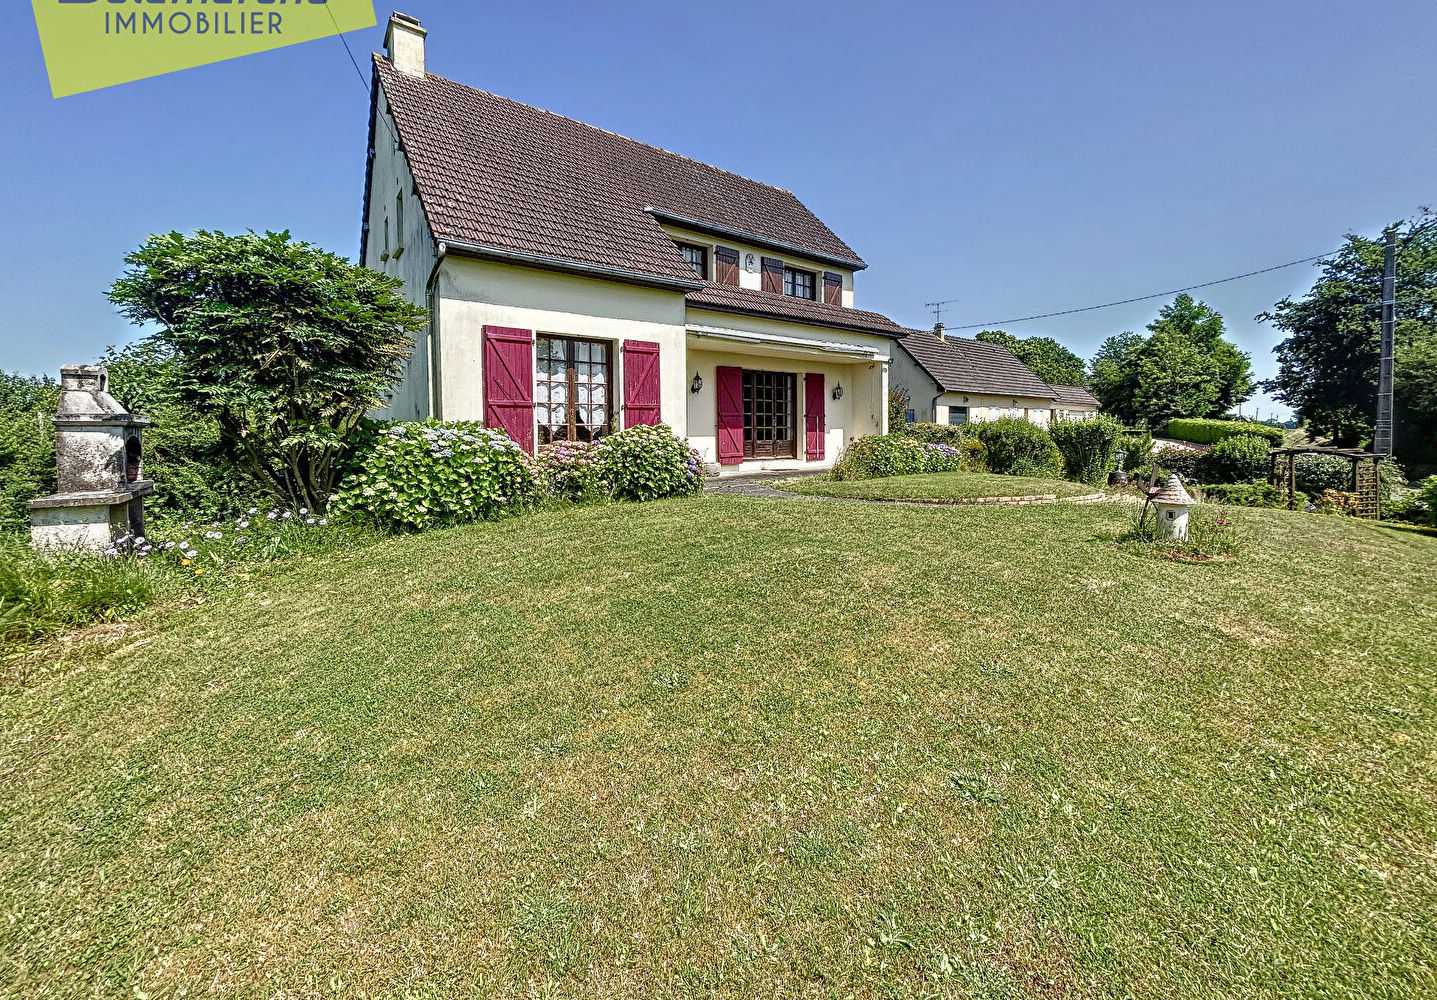 Andere im Avranches, Normandie 11996407